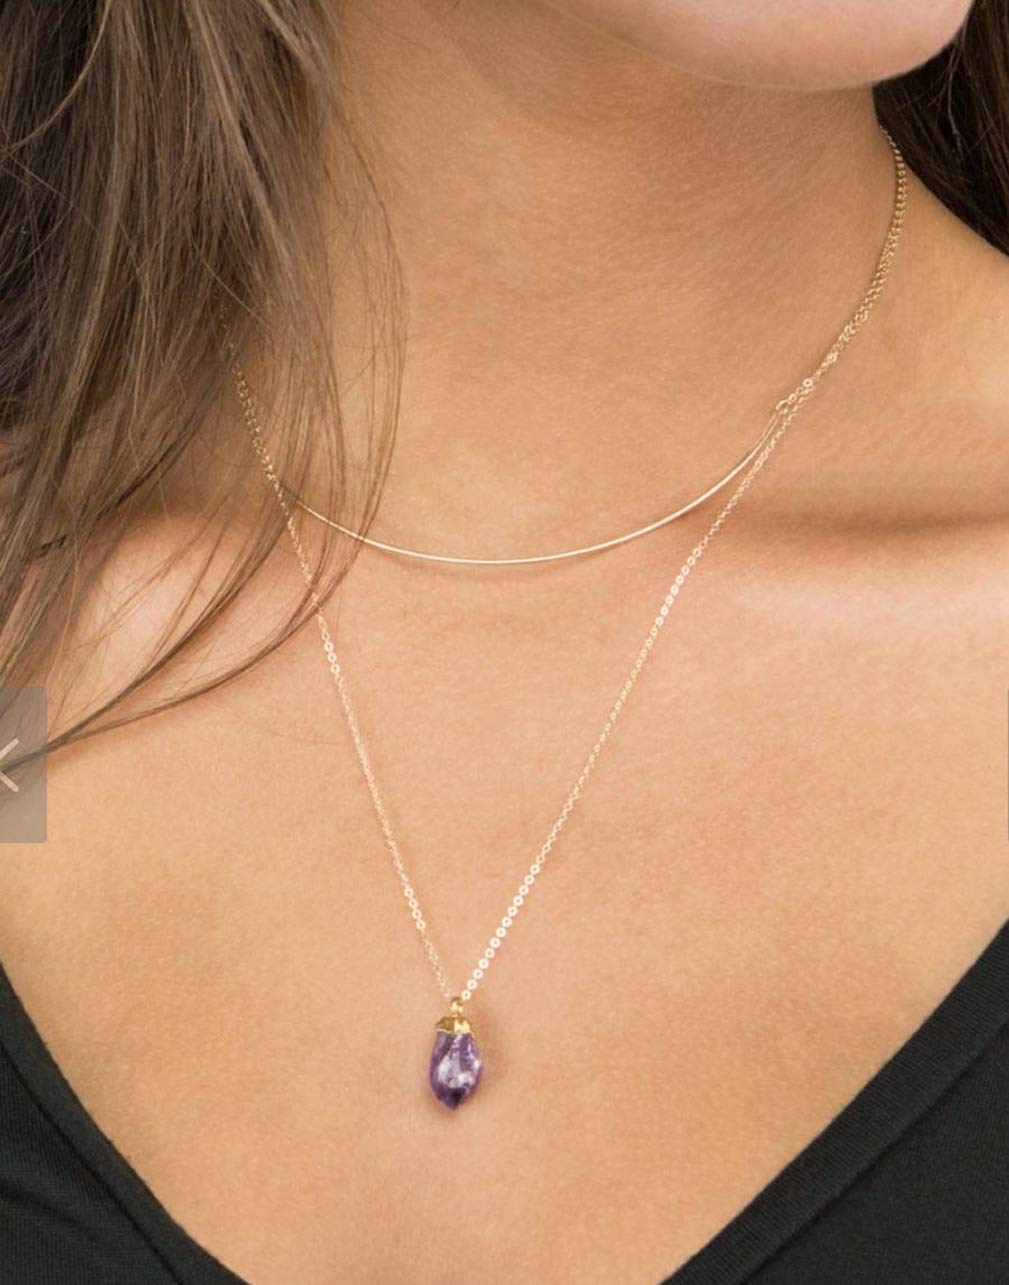 Adabele 1pc Authentic Sterling Silver Small Tiny Raw Amethyst Citrine Gemstone Necklace 18 inch Healing Crystal Chakras Stone Hypoallergenic Nickel Free Women Girl Birthday Gift